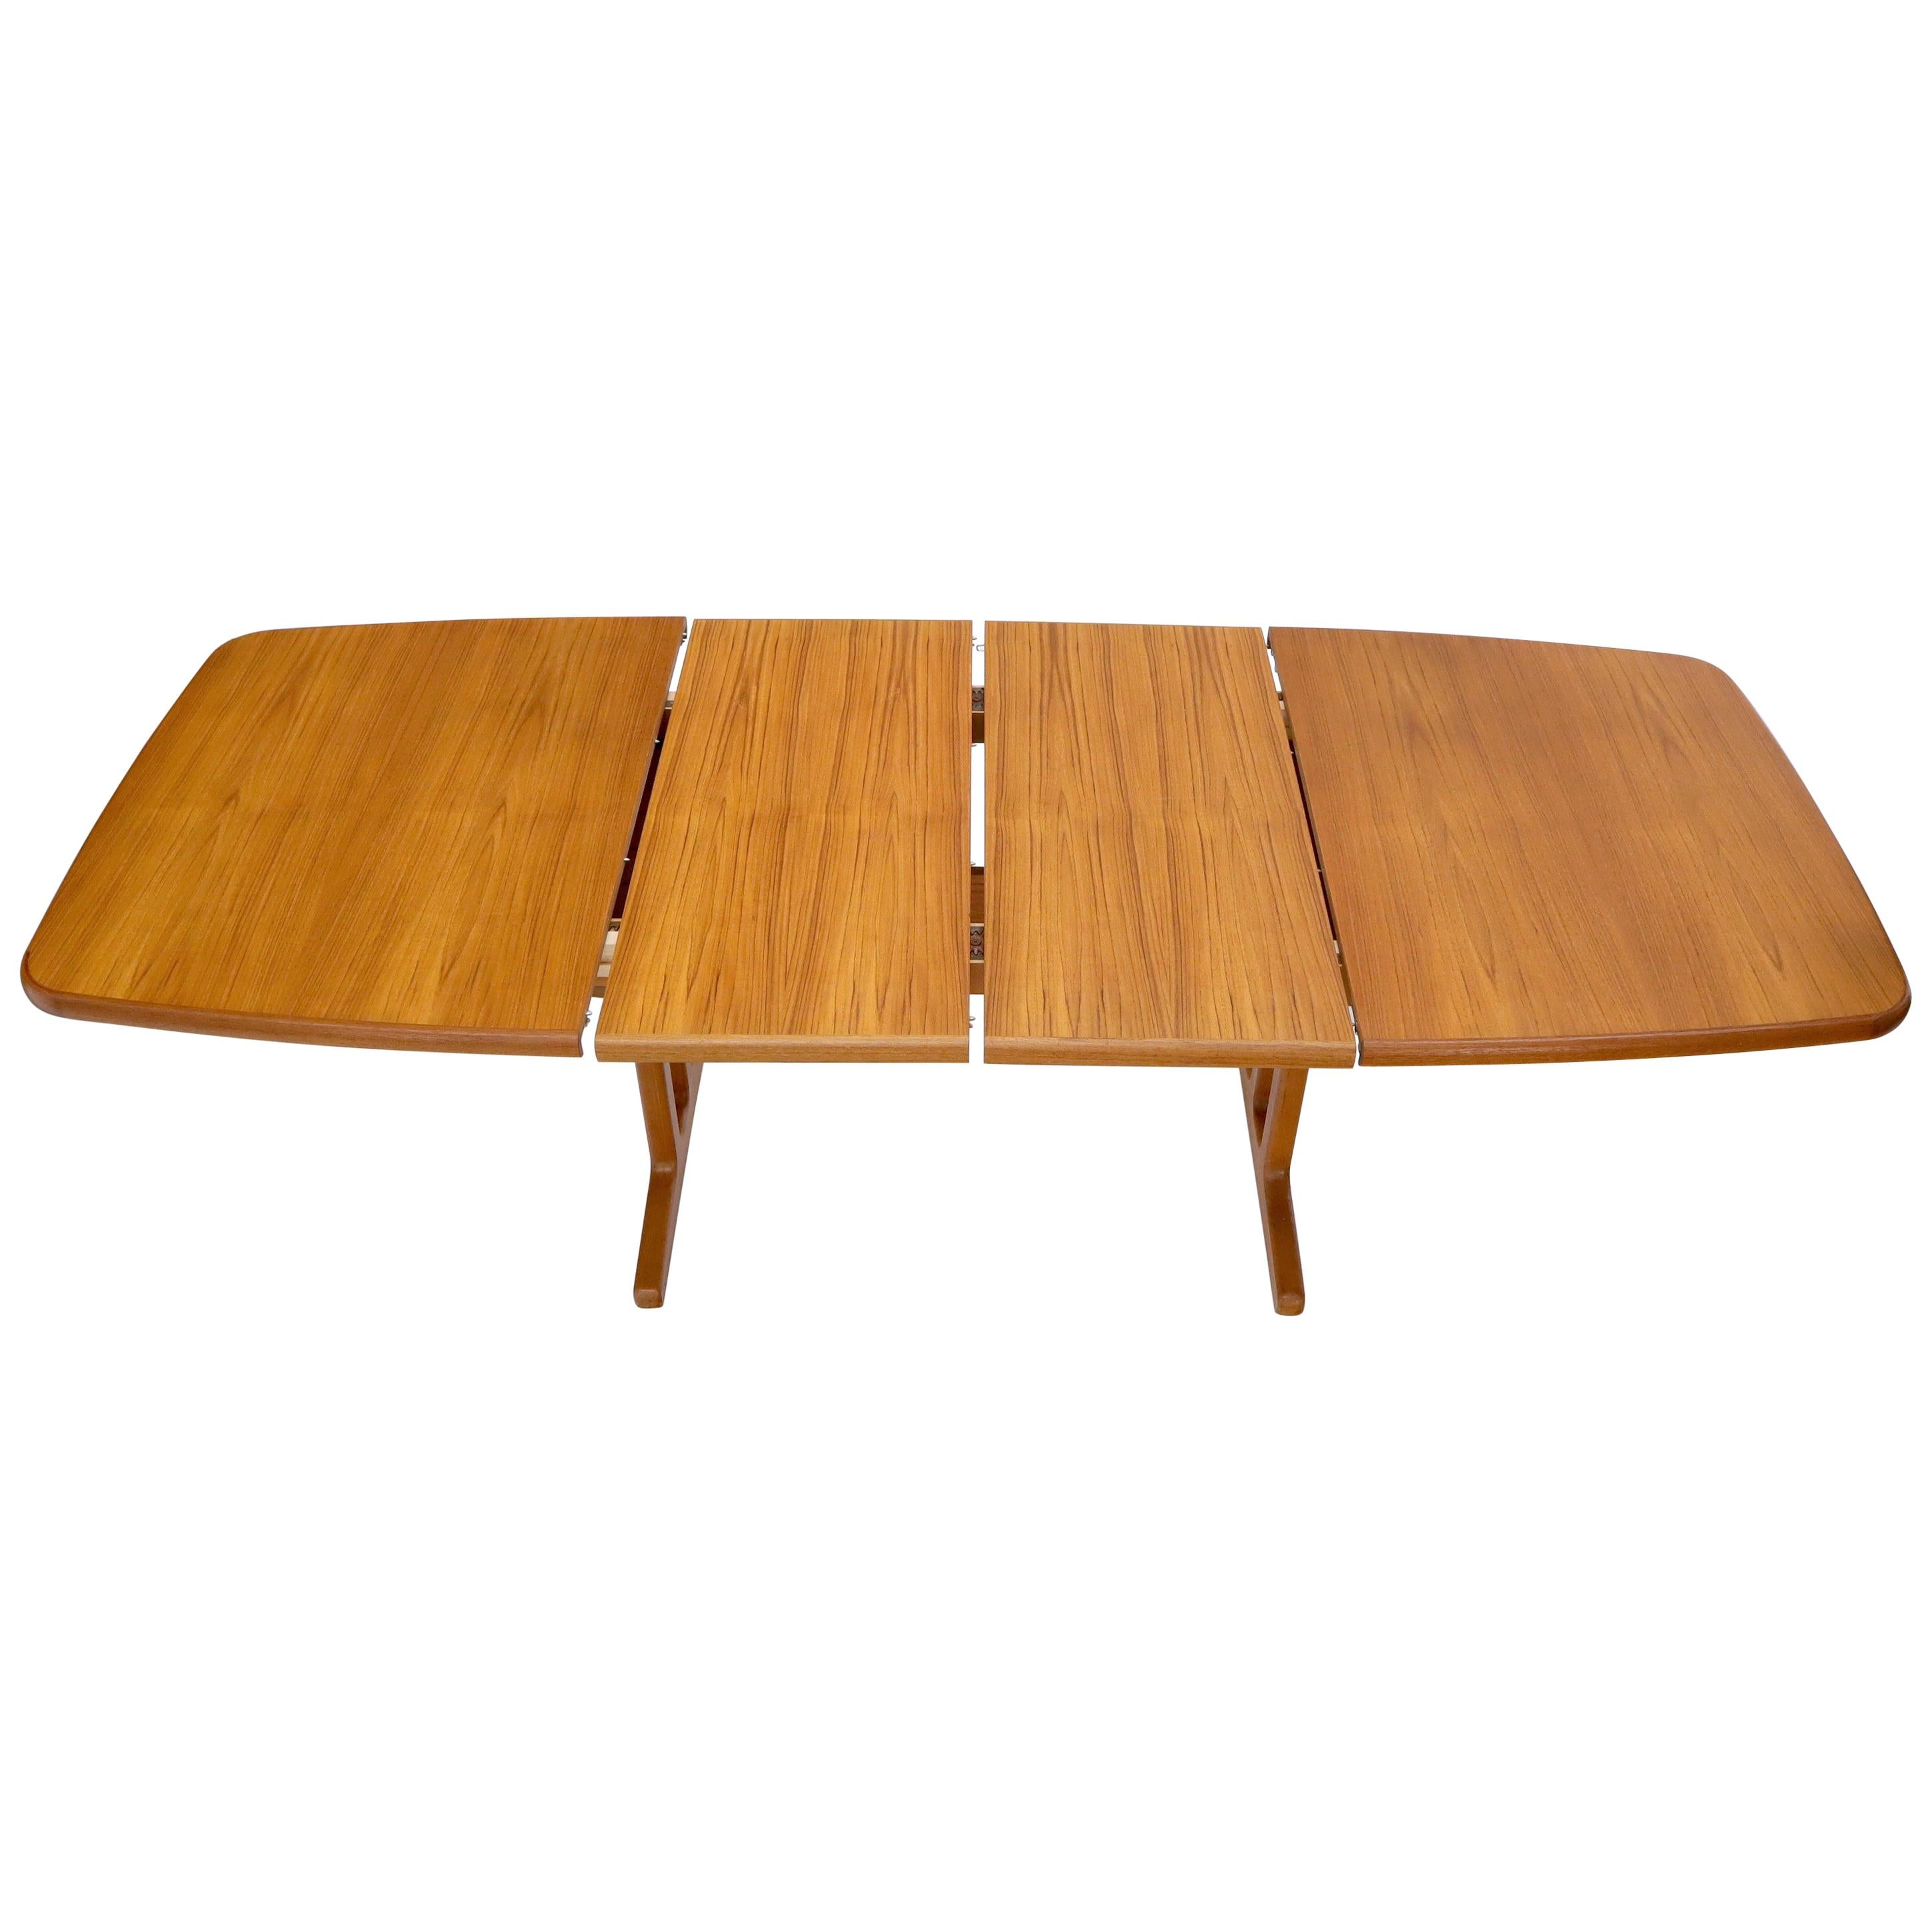 Danish Teak 2 Self Containing Extension Boards Dining Table